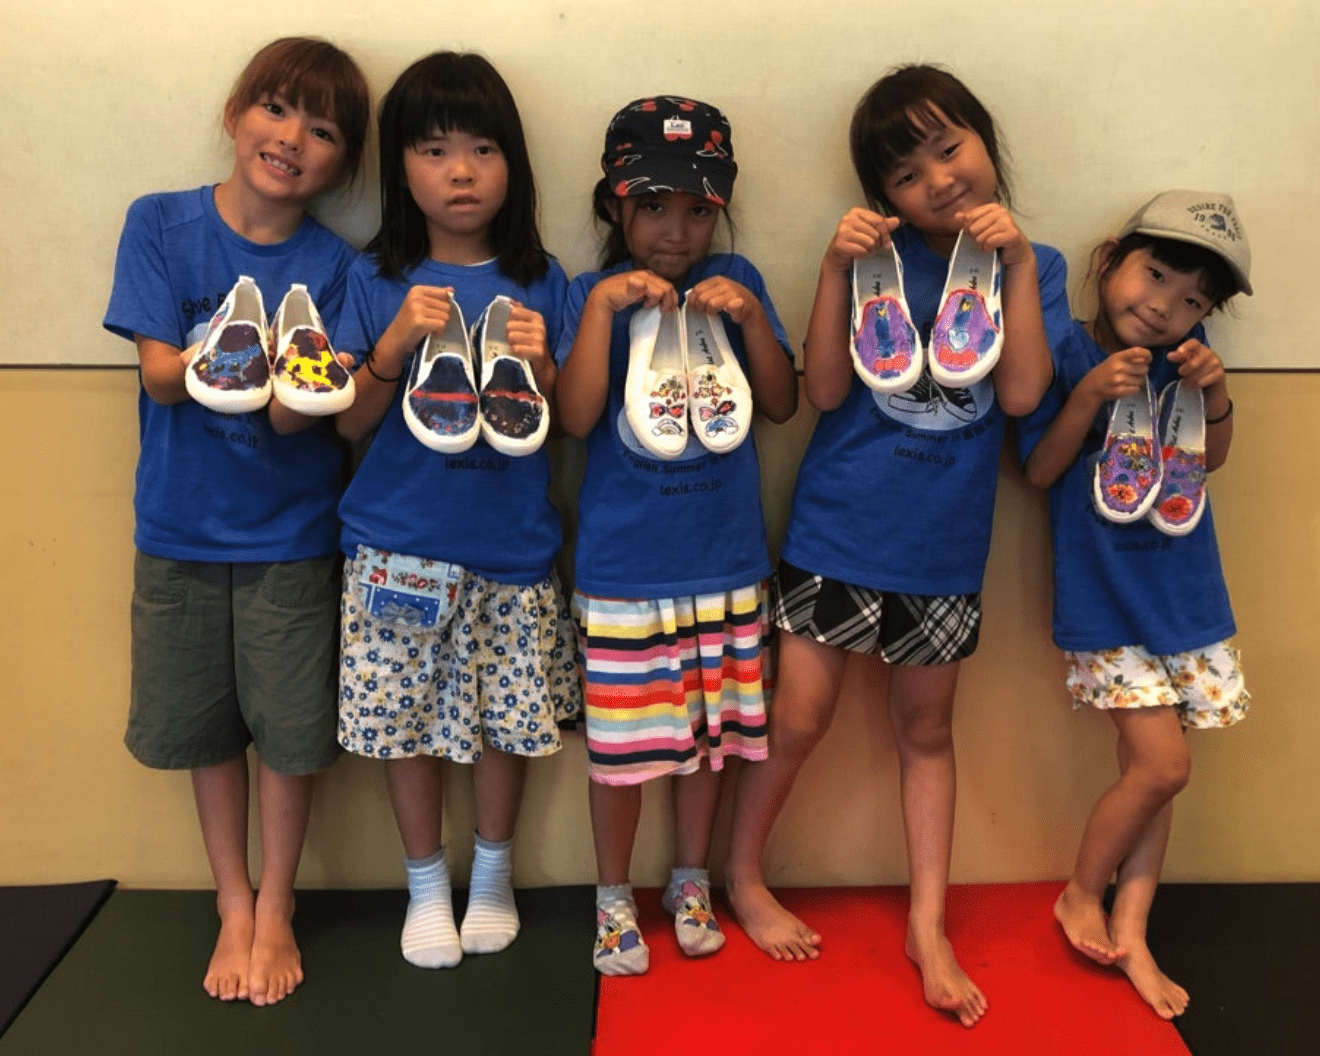 Summer Camp Tokyo 2023 the 2017 shoe project!